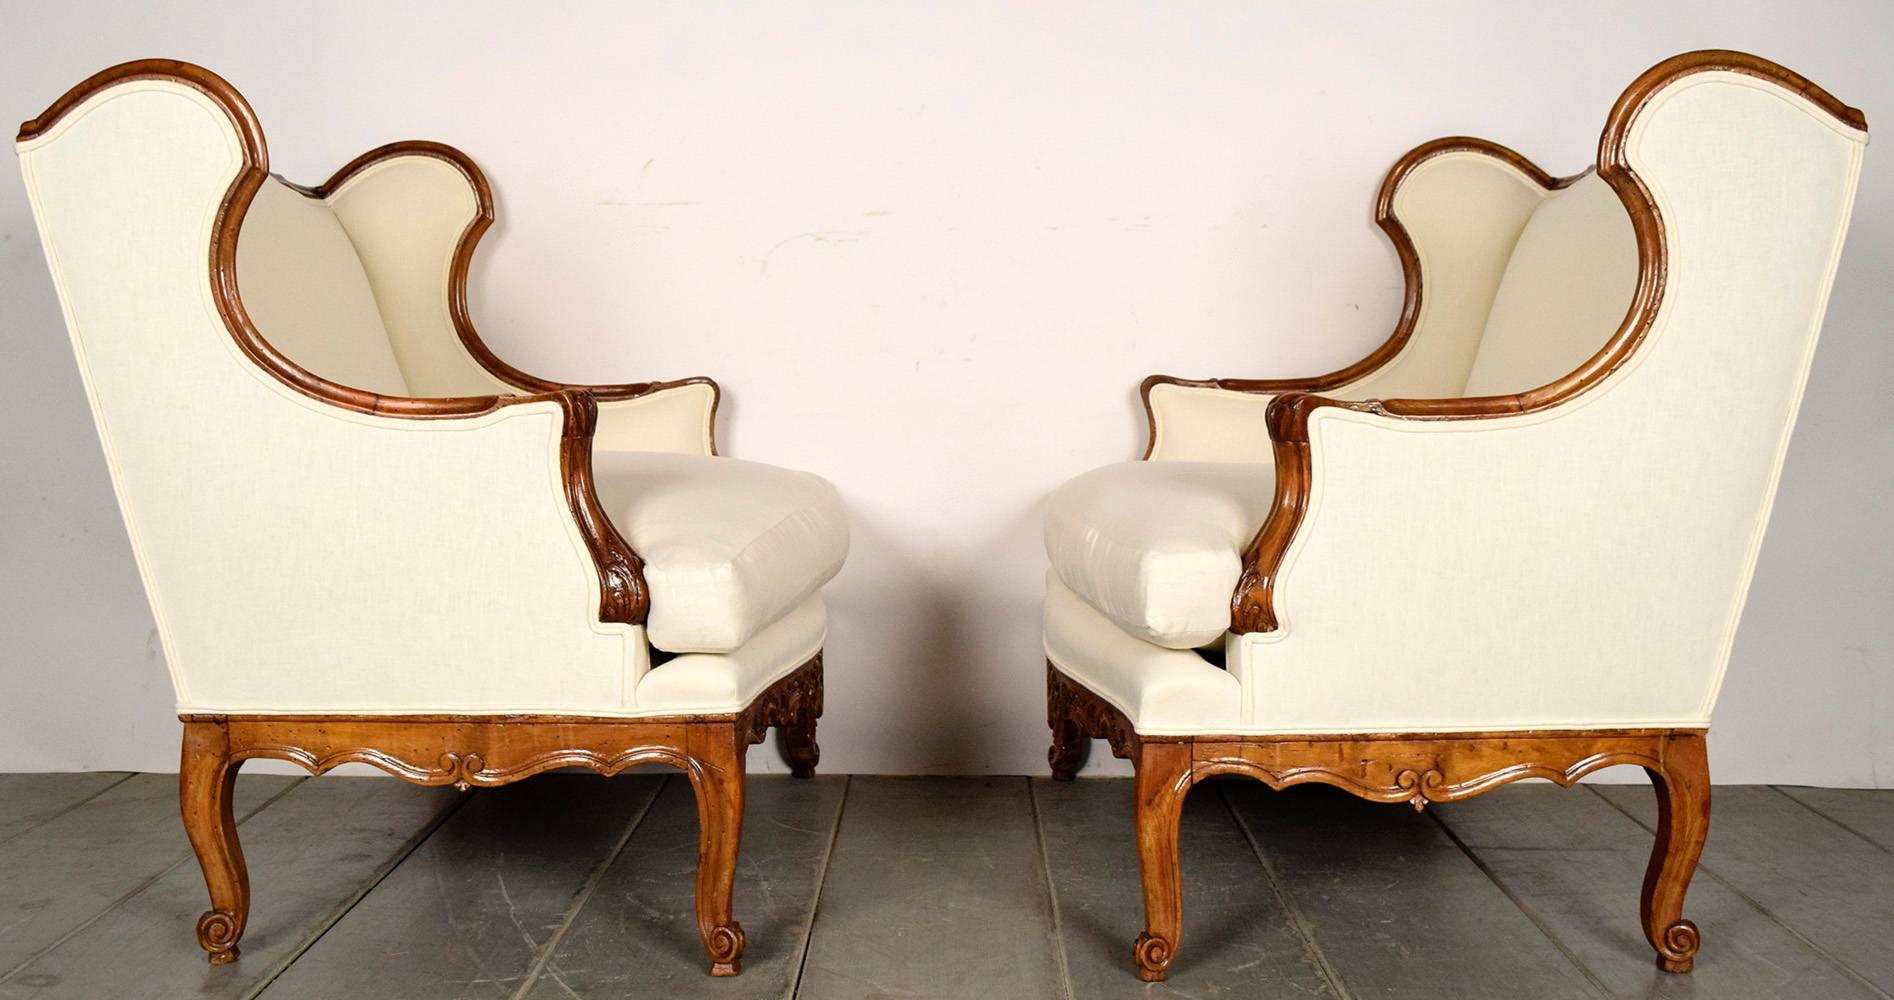 Pair of 19th century wing chairs in Louis XVI-style. Solid wood frames, in its original walnut color finish. Carvings all throughout the frame, with a center crest on the center bottom. Newly upholstered in a ivory linen fabric, with double piping